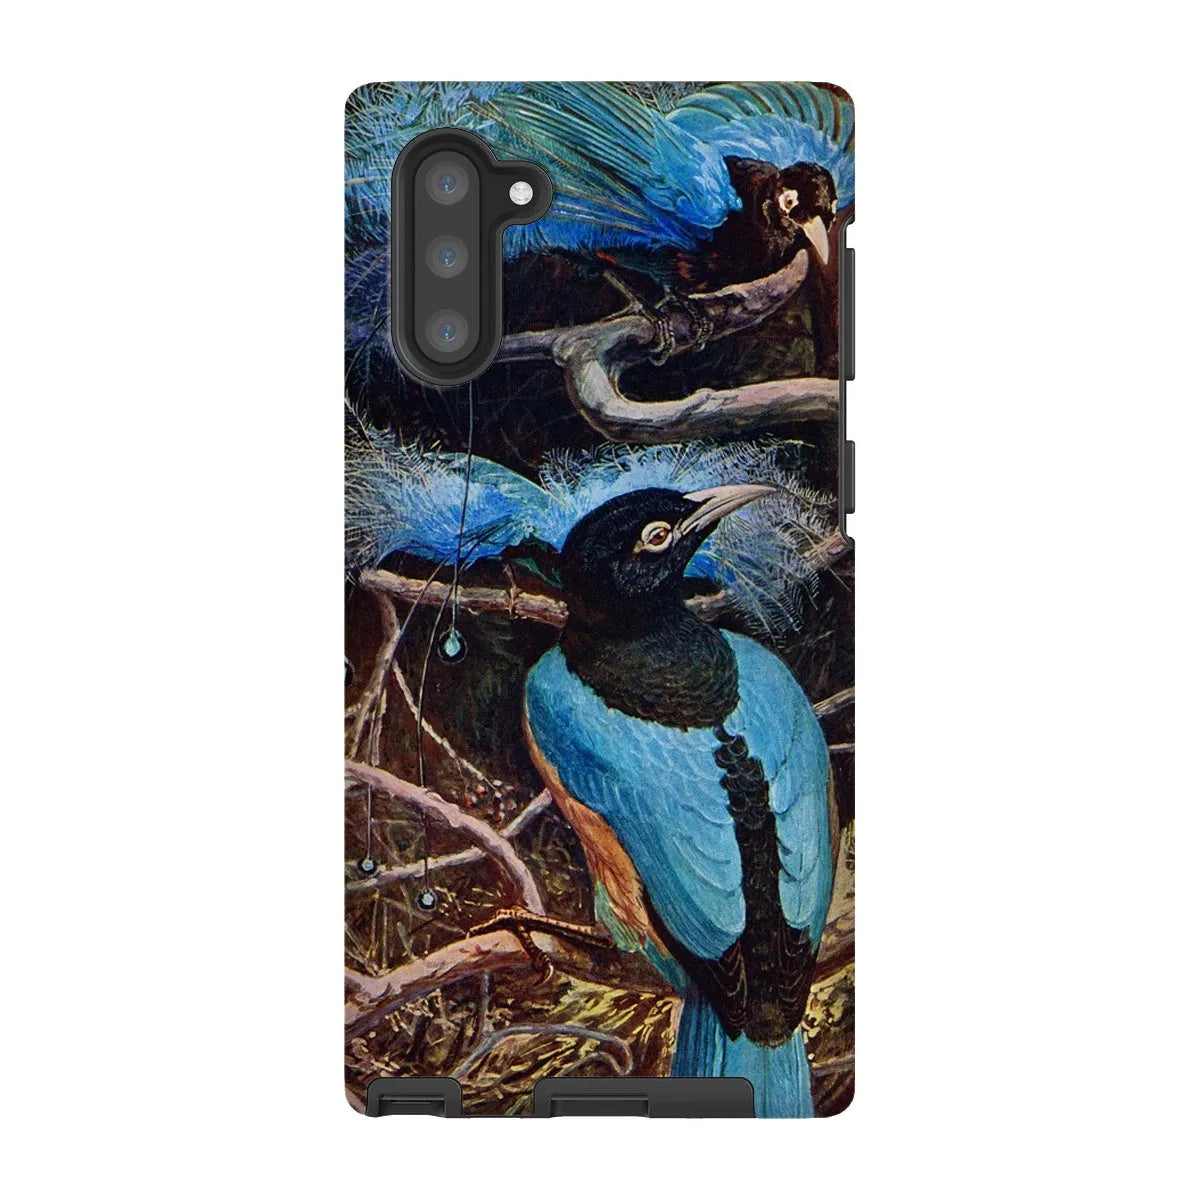 Blue Bird Of Paradise Aesthetic Phone Case - Henry Johnston - Samsung Galaxy Note 10 / Matte - Mobile Phone Cases